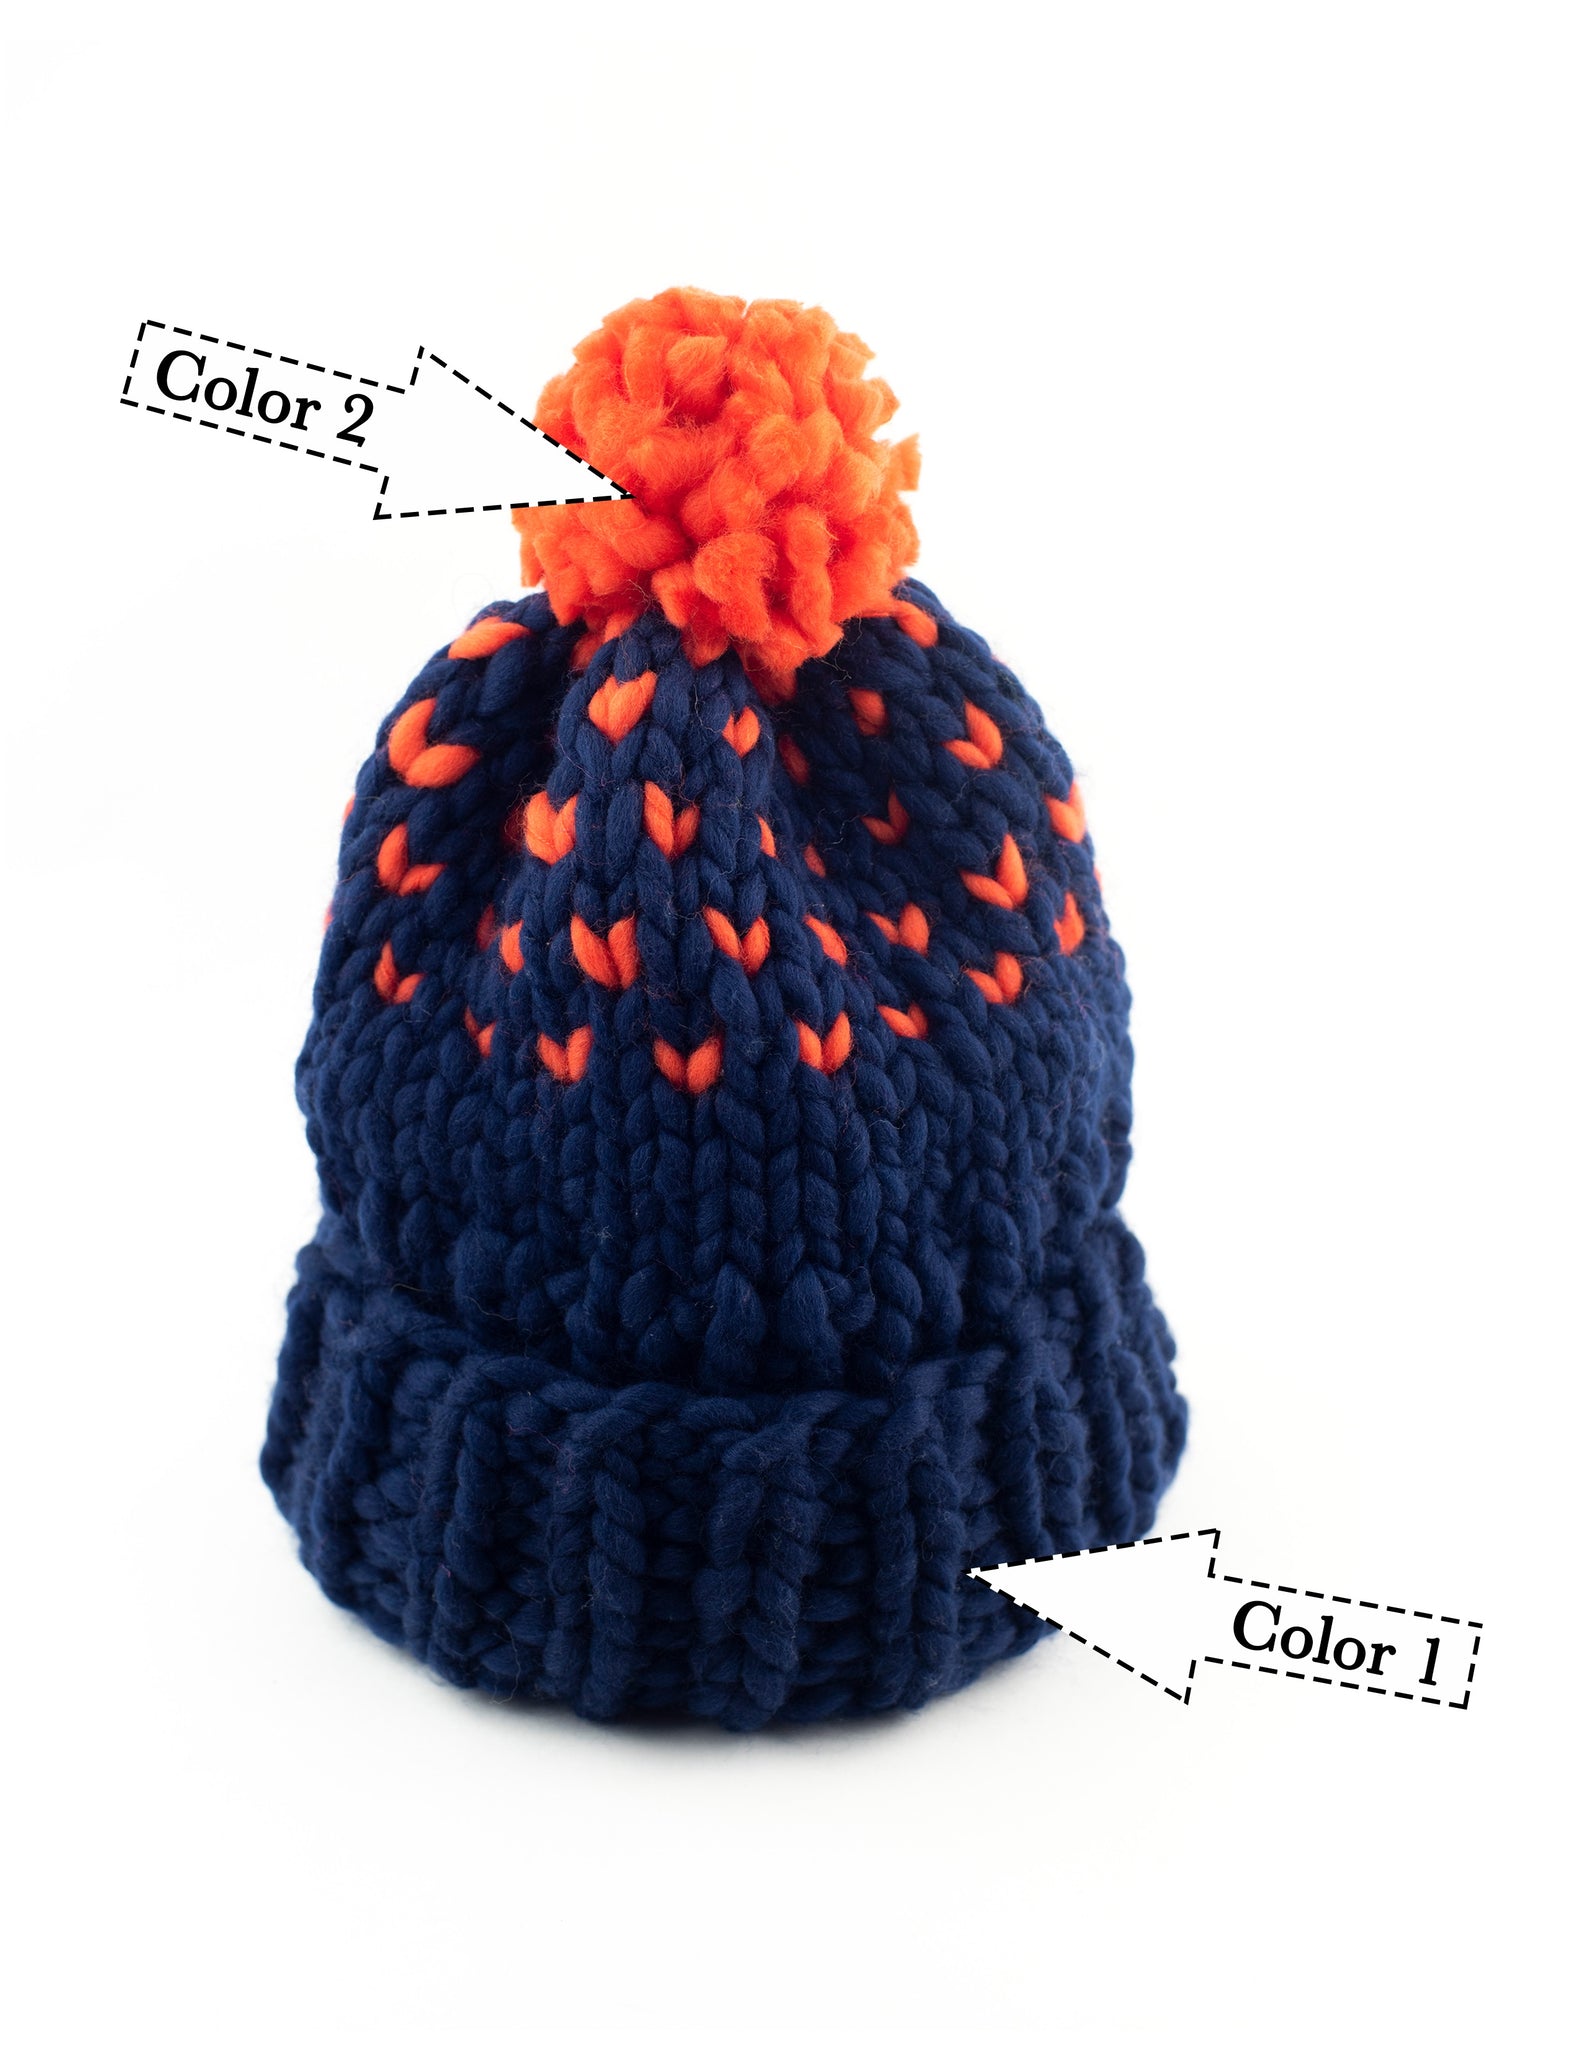 DIY Kit - Edelweiss Pompom Hat with 2 colors - Merino No. 5